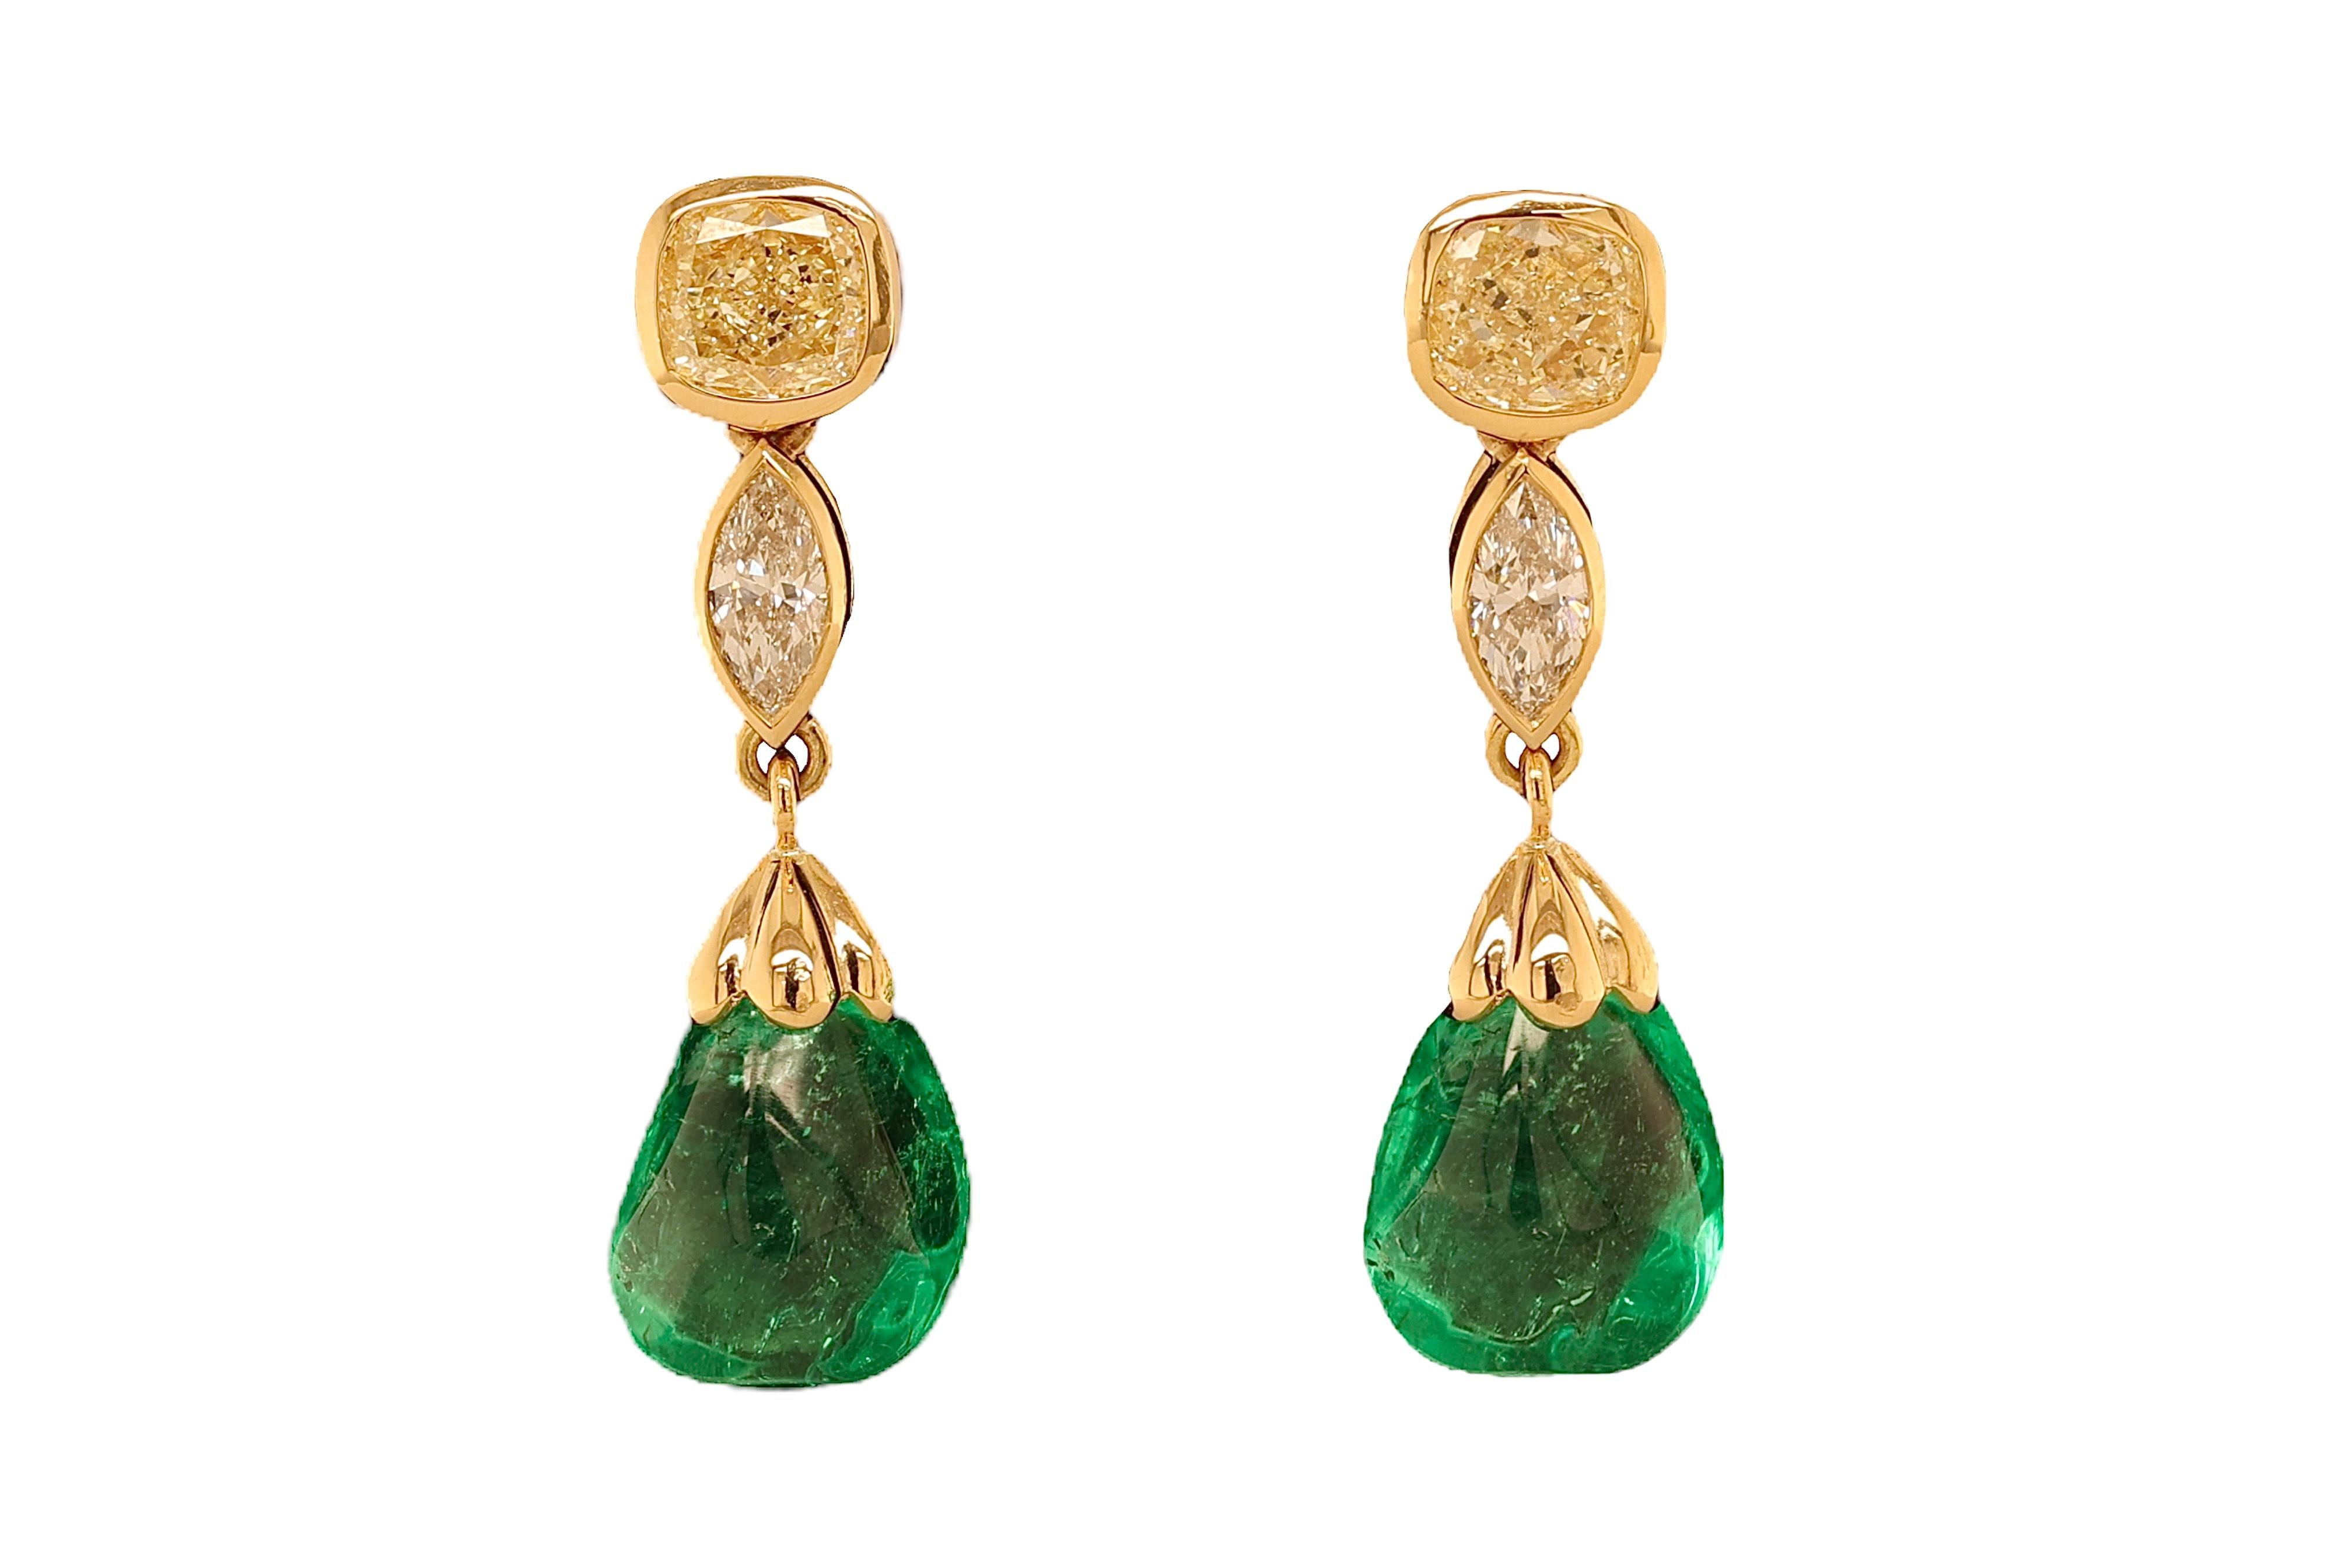 Gorgeous 18 Kt. Earrings Minor Colombian 5.39 & 5.14ct Emeralds, Fancy Yellow Cushion Diamonds, CGL Certified

One of a kind completely hand made in our atelier .

Emeralds: 2 Intense green, Minor Colombian Emeralds, 5.39 ct. and 5.14 ct. 
Comes